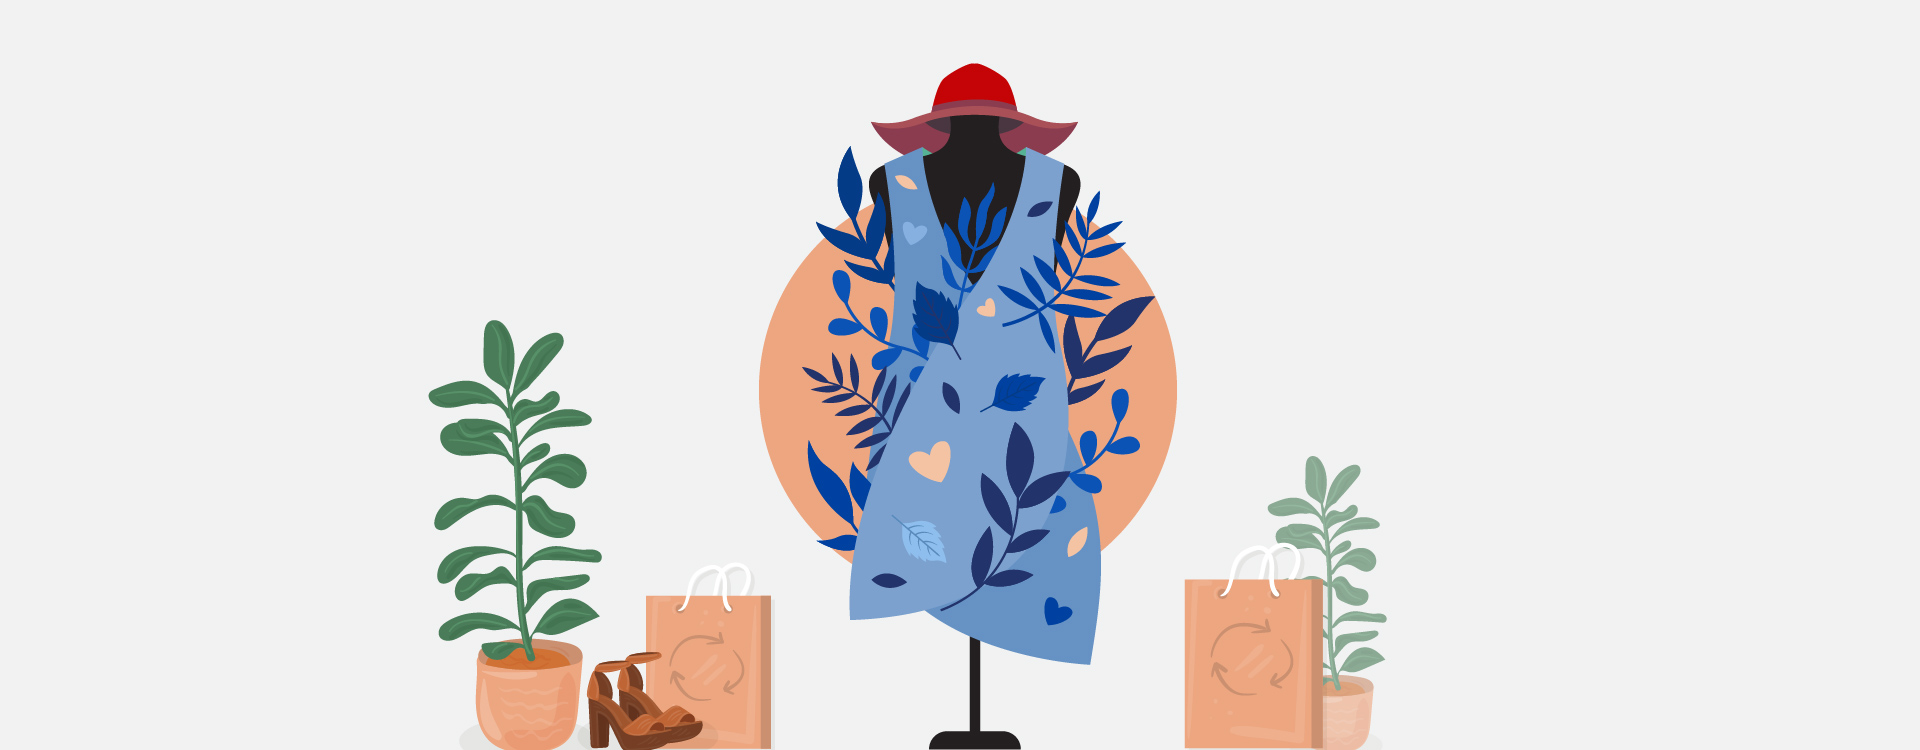 Millennials and GenZ are driving the demand for sustainable brands.